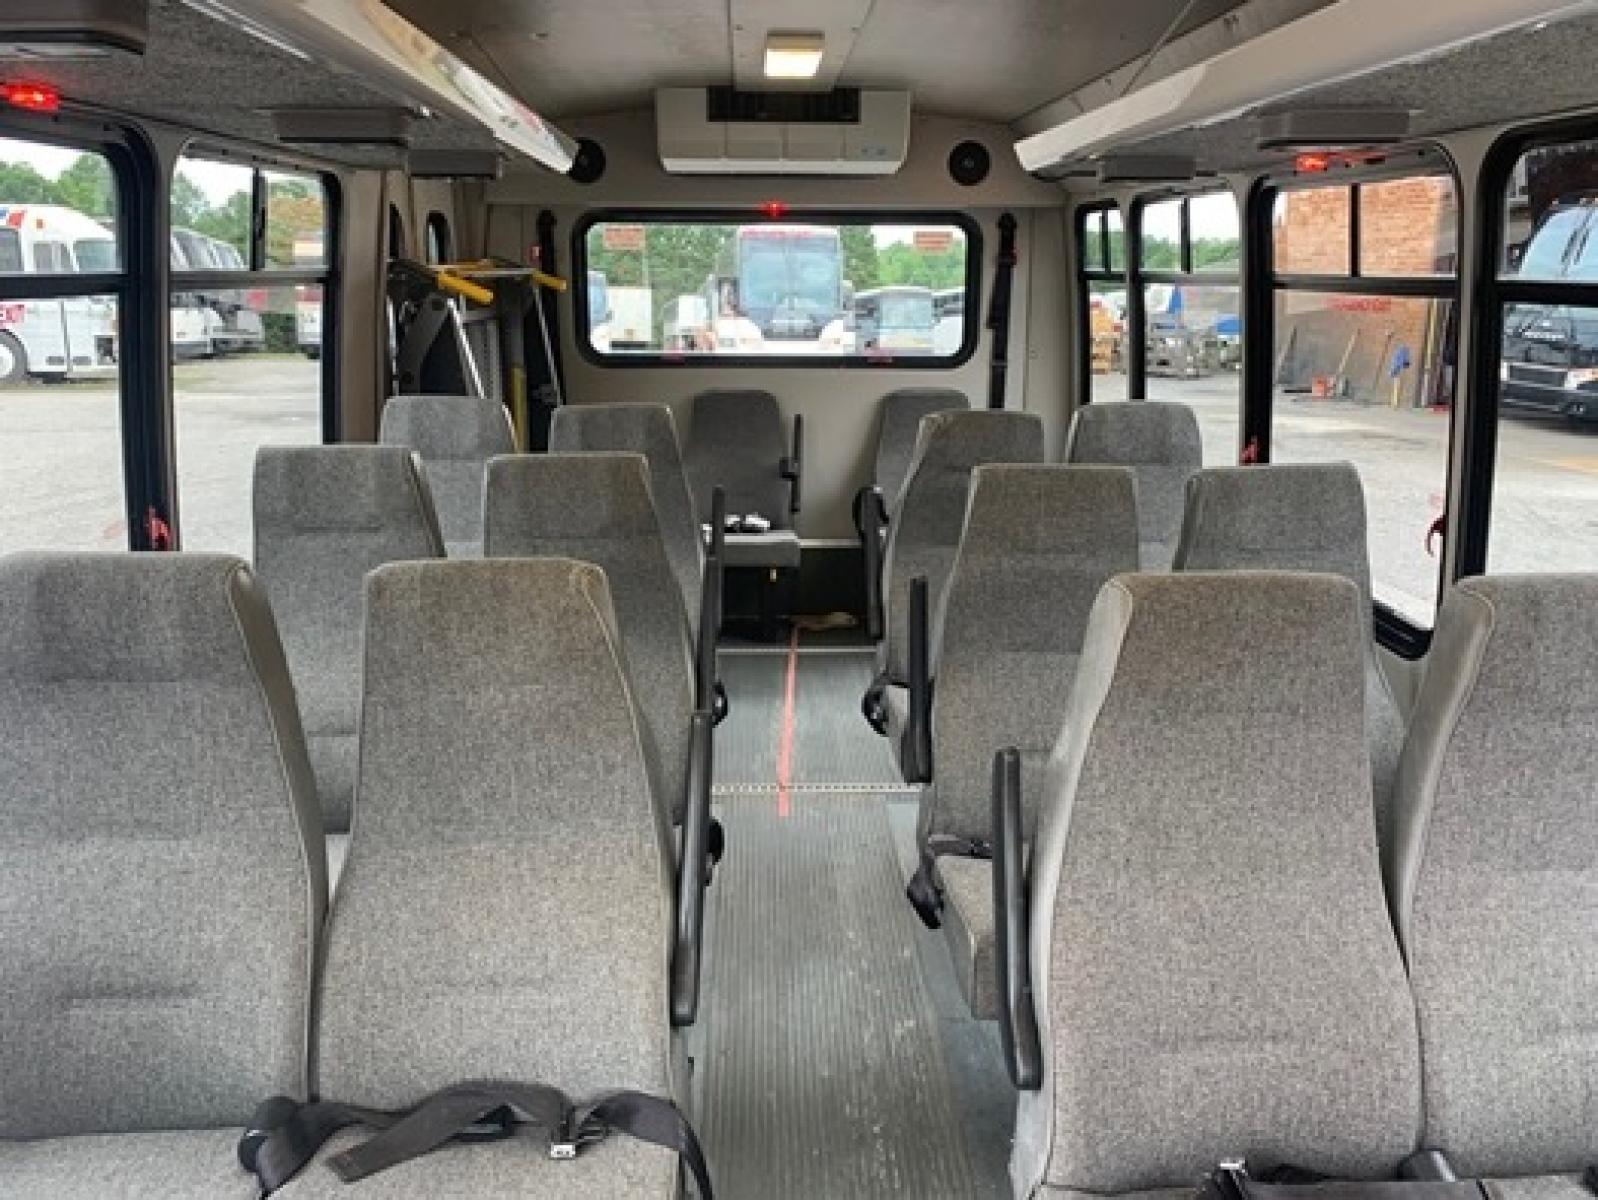 2009 White Ford E350 with an V8 engine, Auto transmission, 0.000000, 0.000000 - 2009 Ford E-350 Elkhart Conversion,- 5.4L V8 Gas Engine - Automatic Trans - Electric Entrance Door - 14 Passengers & Driver - 12 + 1 Wheelchair - High Back Seats - Retractable Seat Belts - Stainless Wheel Simulators - Front and Rear A/C - Handicap Lift - Photo #7